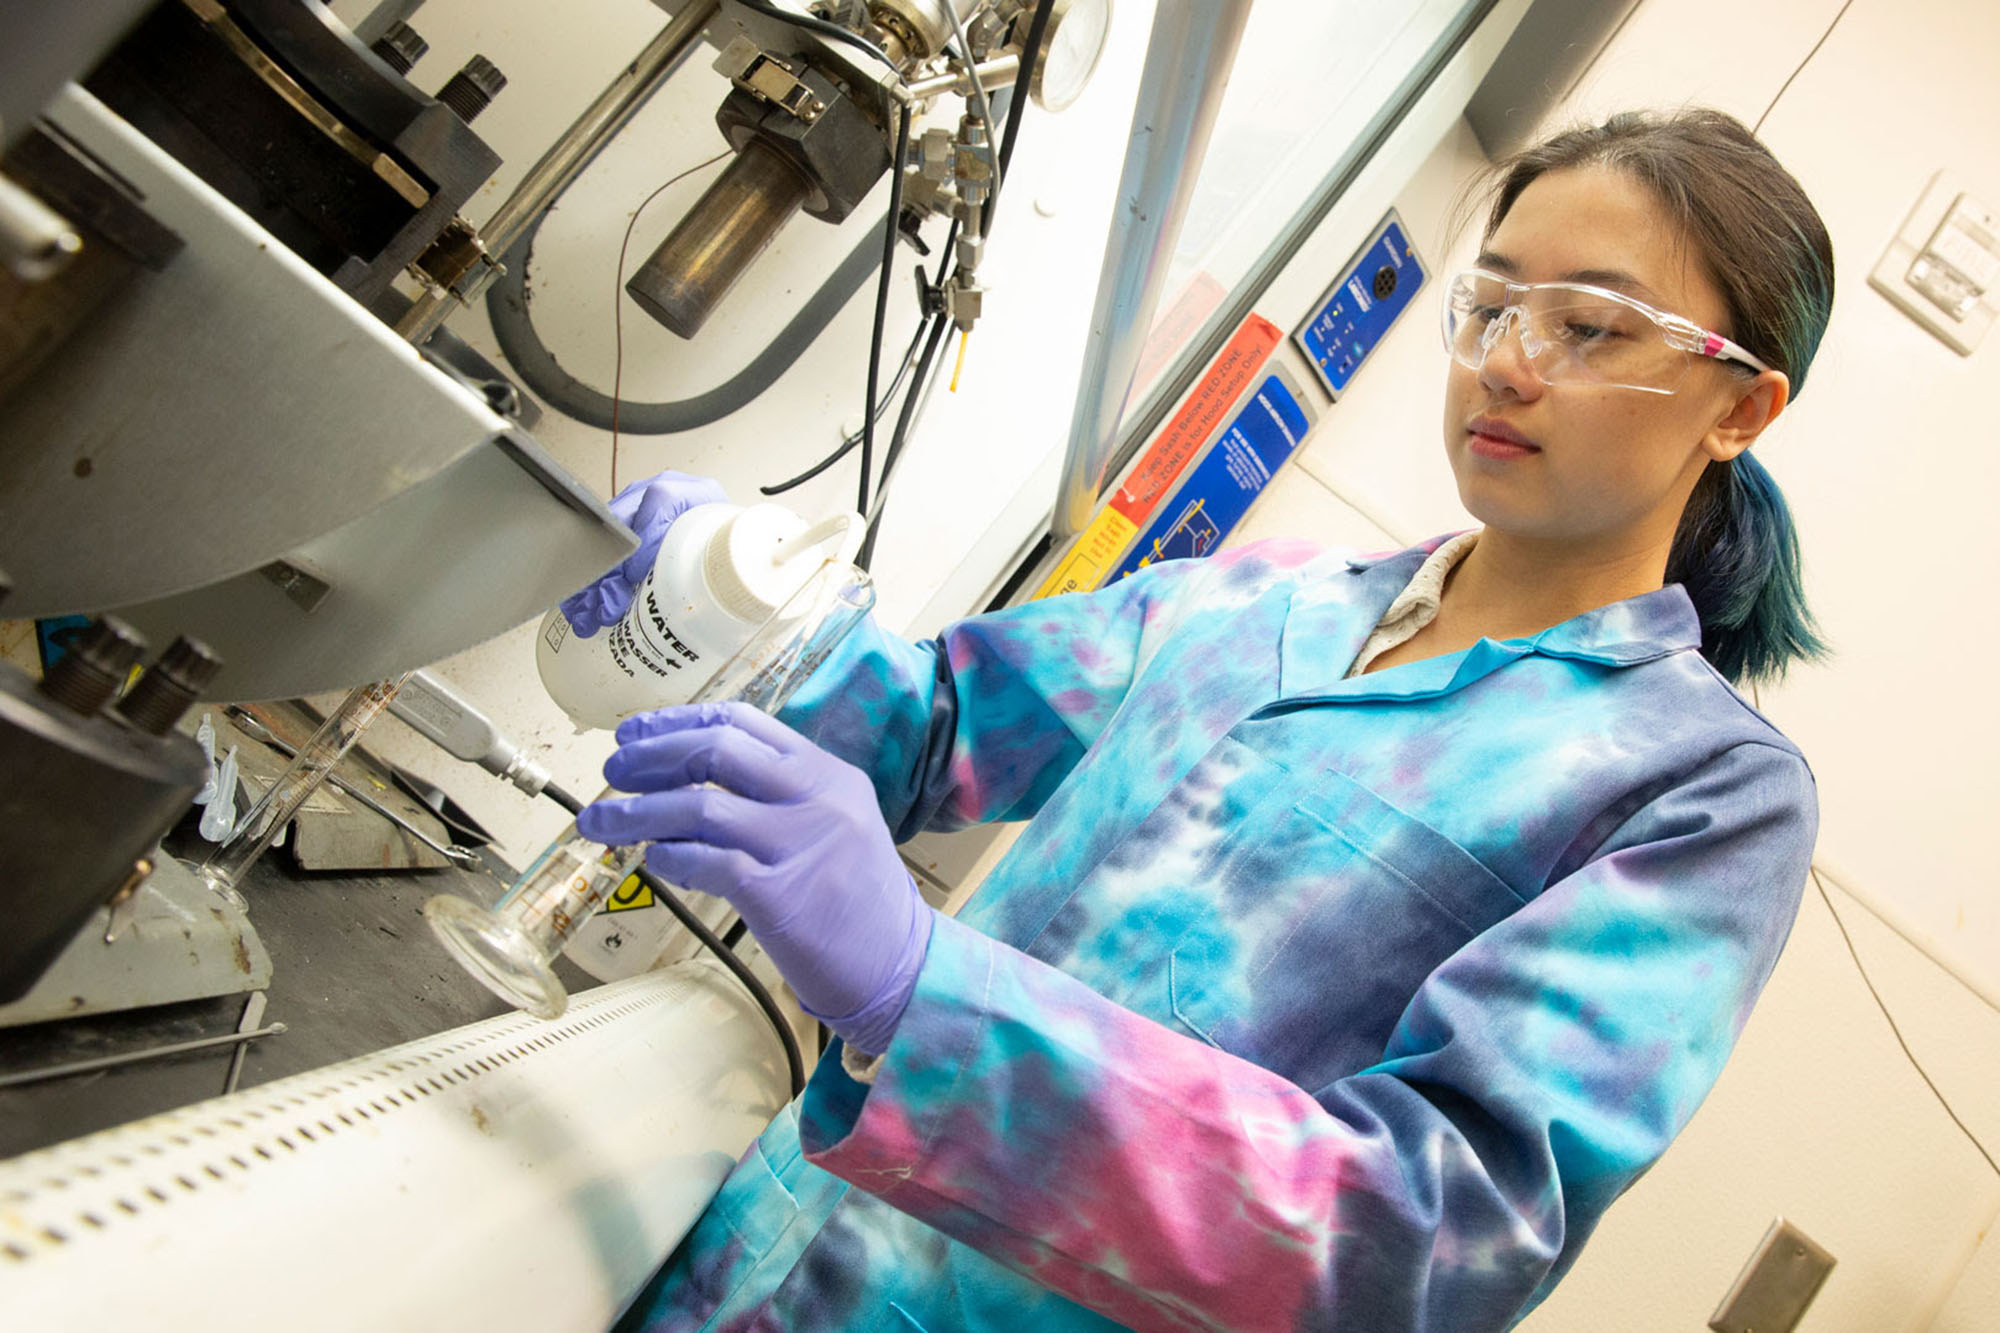 An ASU Engineering student researcher wears a tie-dyed lab coat, protective goggles and lavender latex gloves while working in her lab under the ventilation hood.